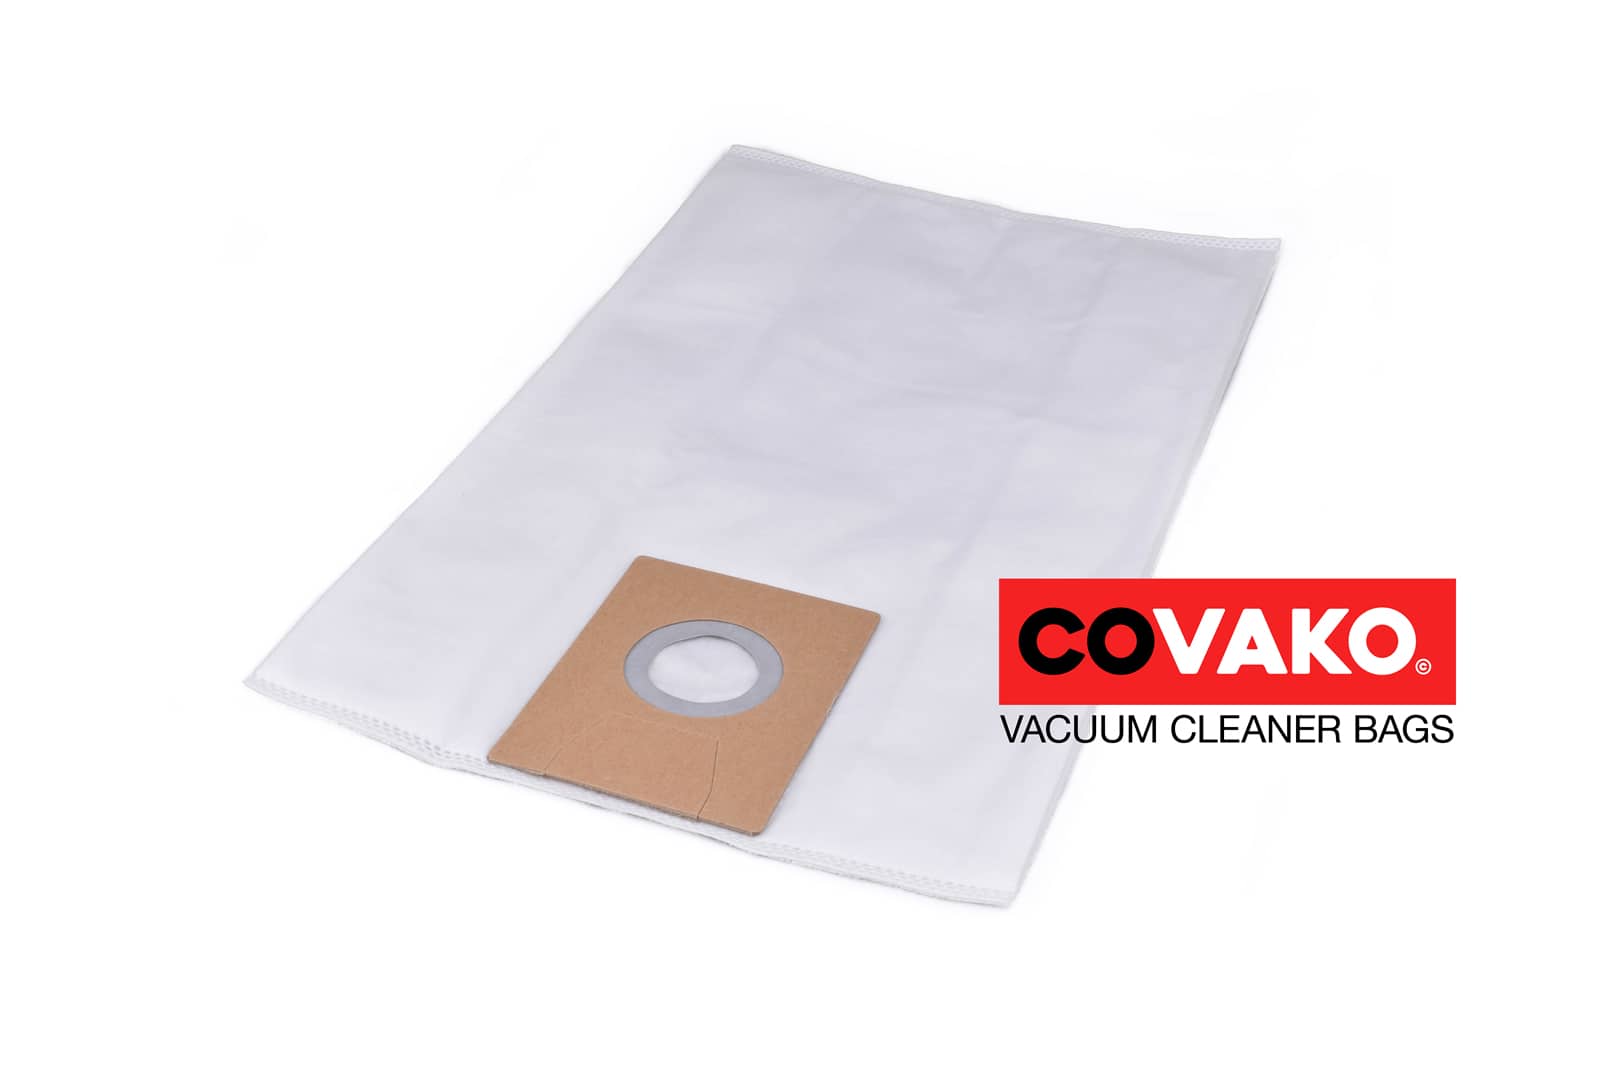 Comac Silent 25 / Synthesis - Comac vacuum cleaner bags